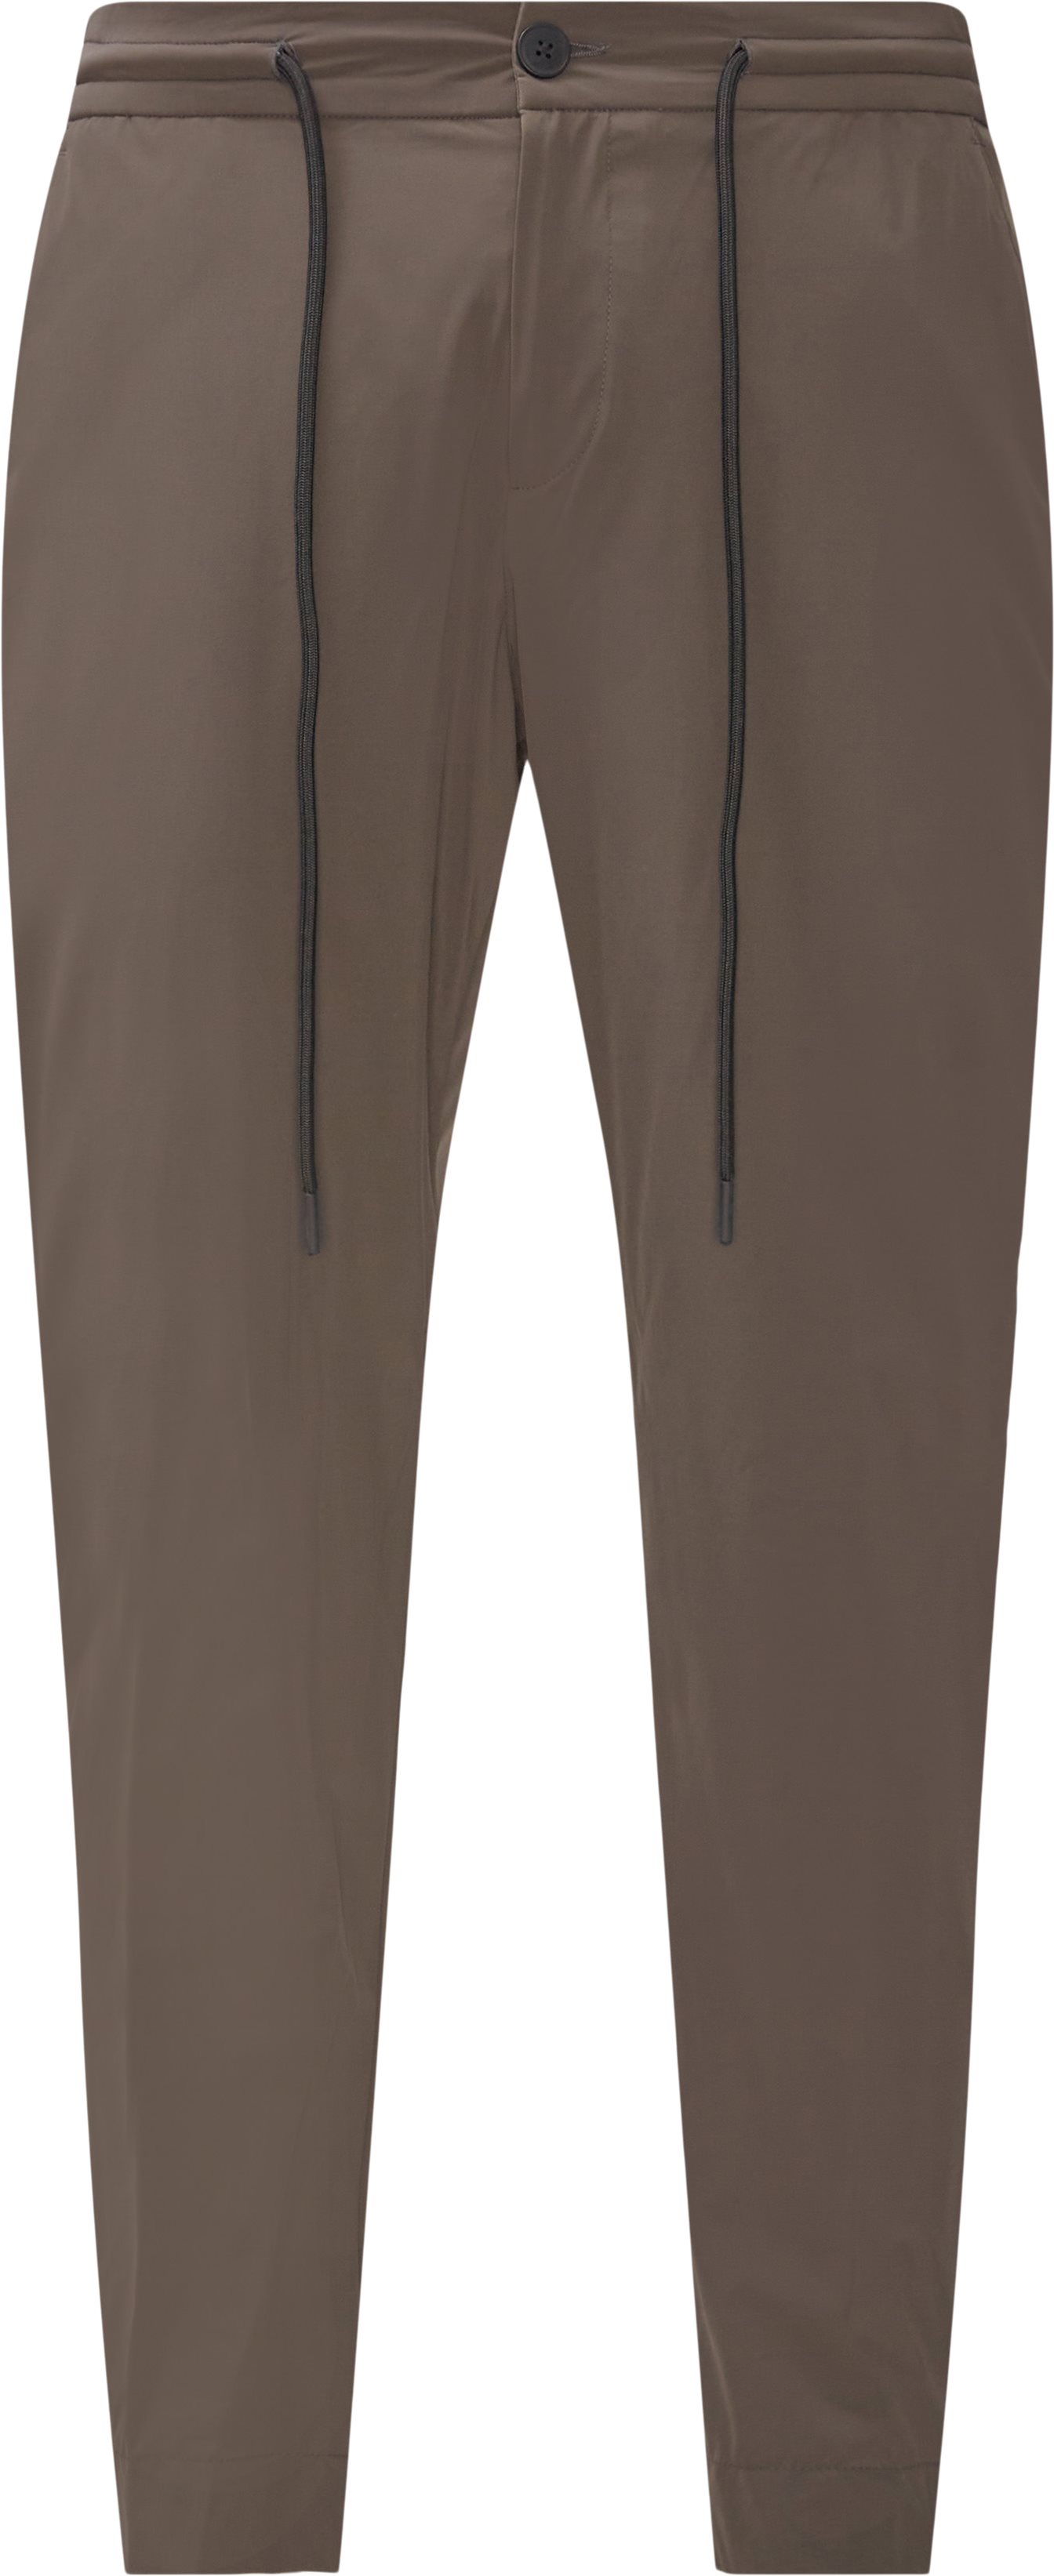 Tech Pants - Trousers - Regular fit - Army